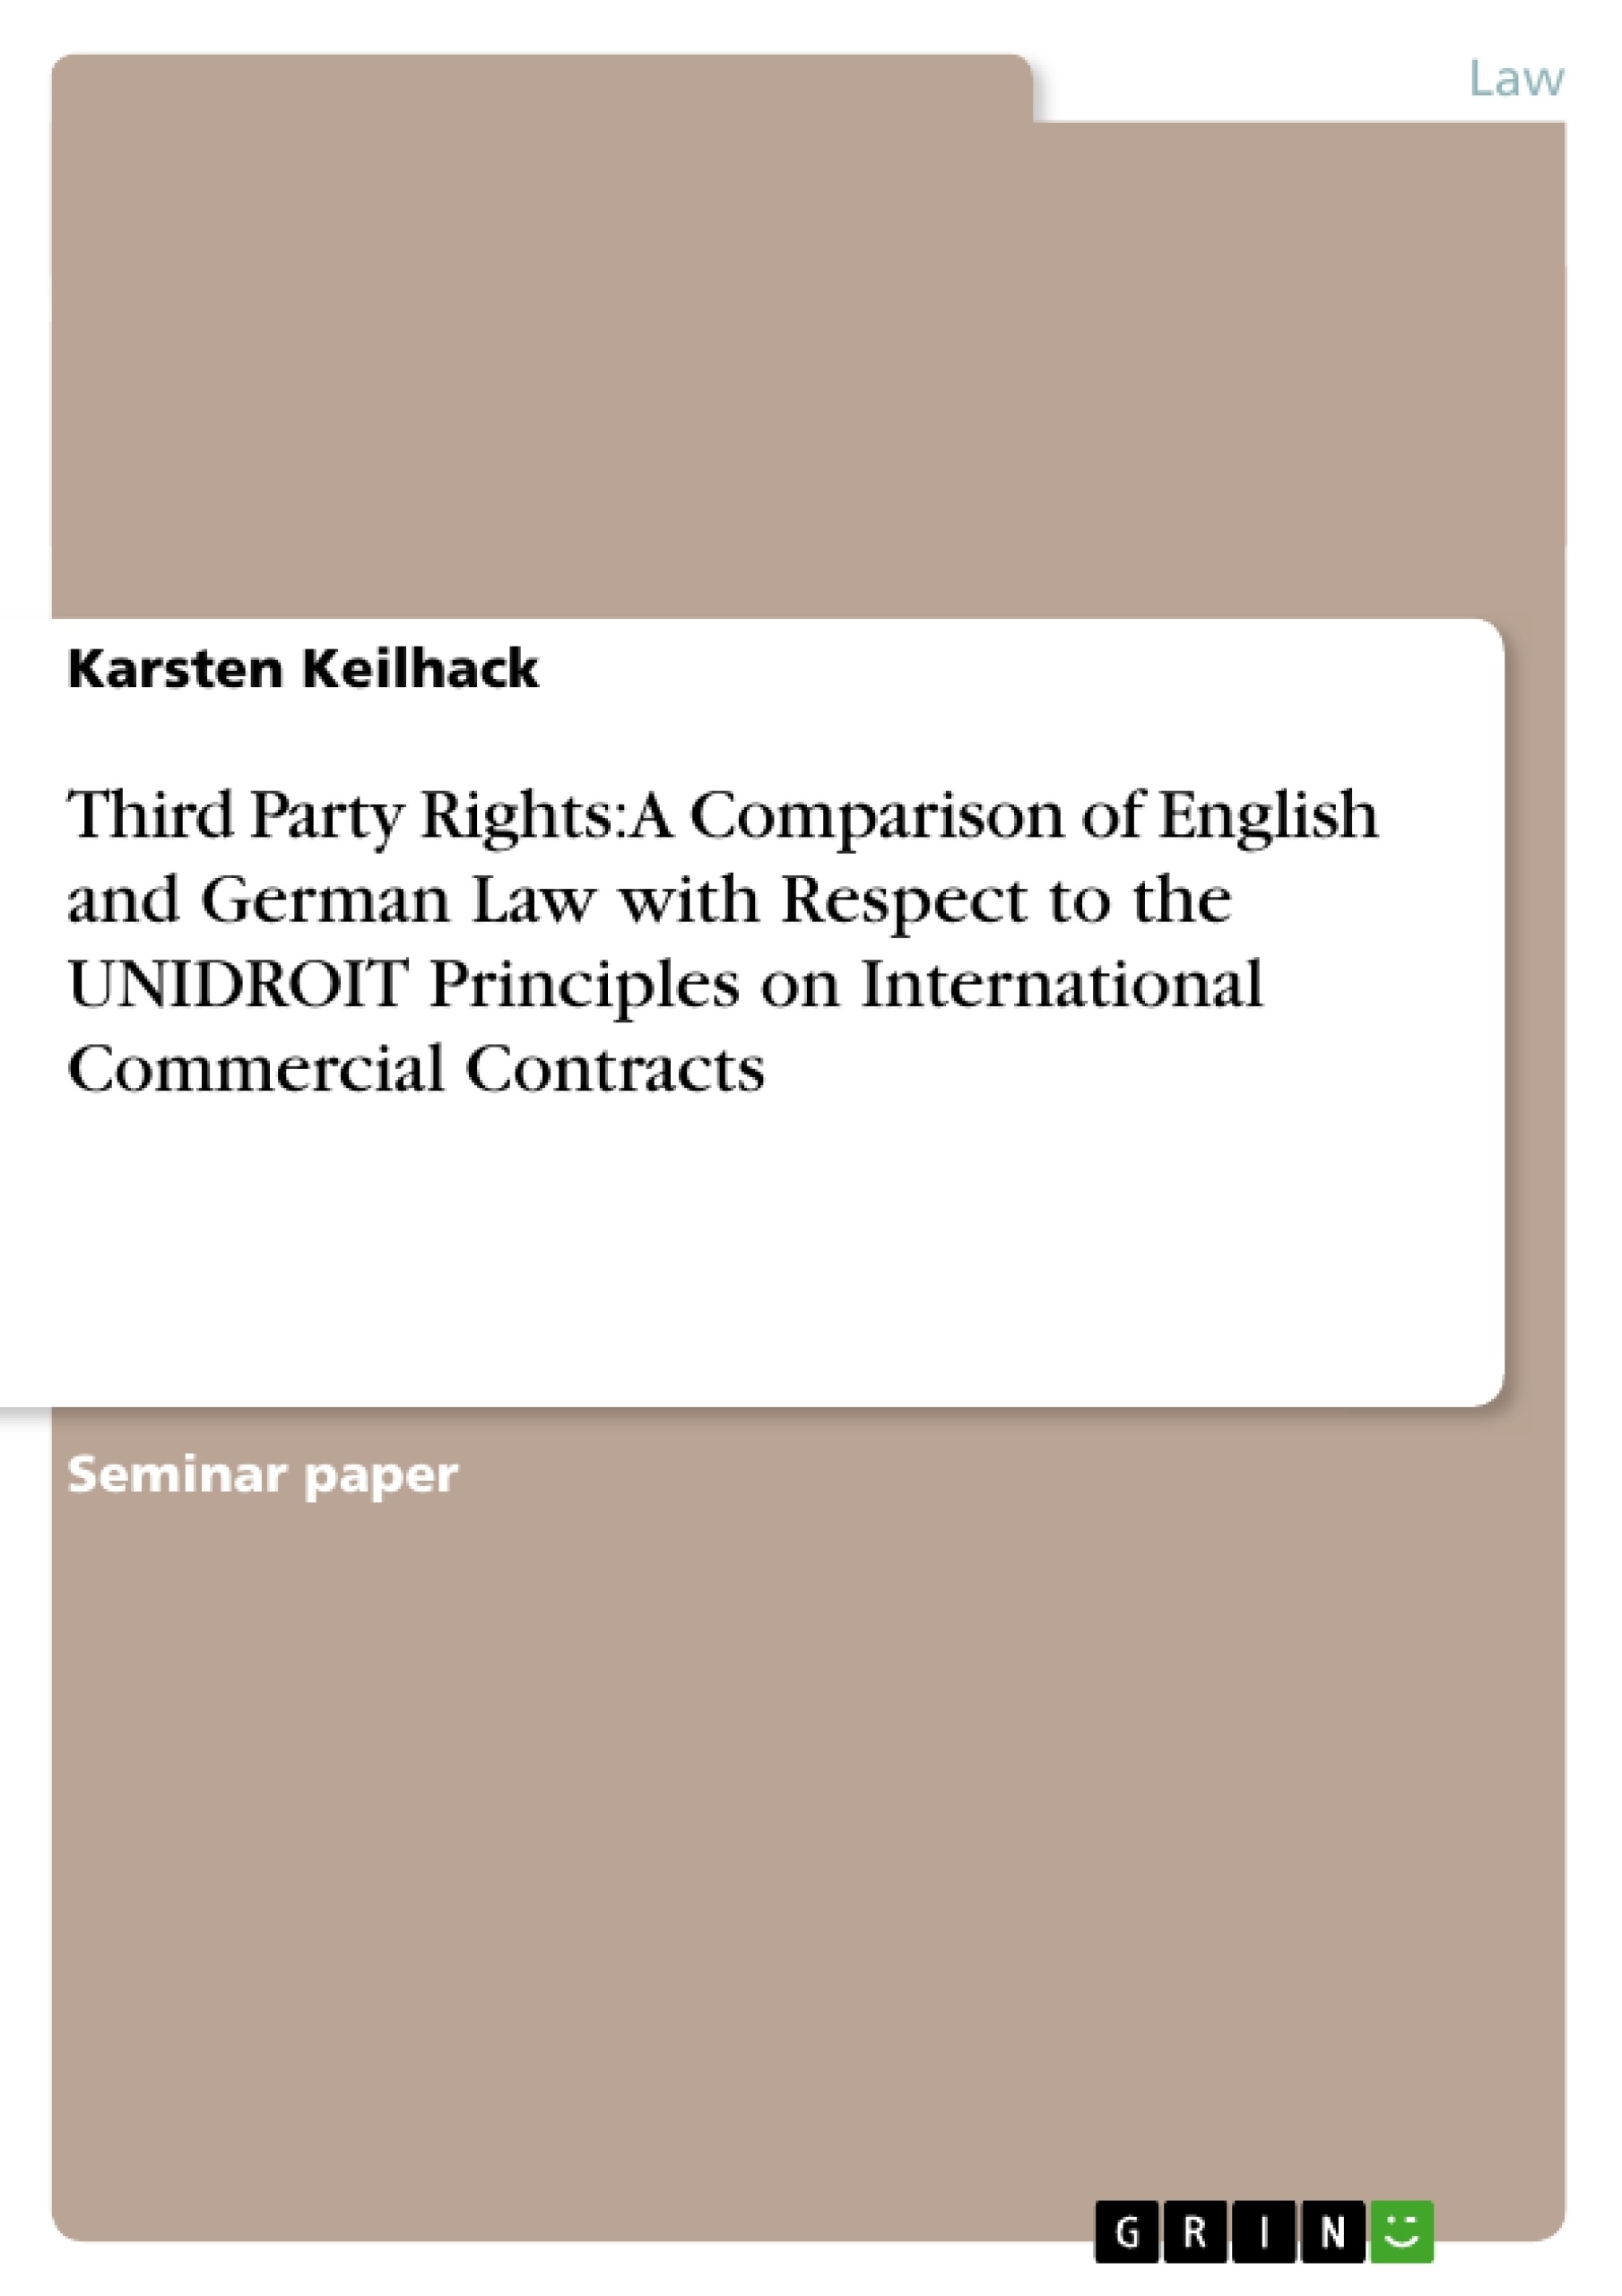 Title: Third Party Rights: A Comparison of English and German Law with Respect to the UNIDROIT Principles on International Commercial Contracts